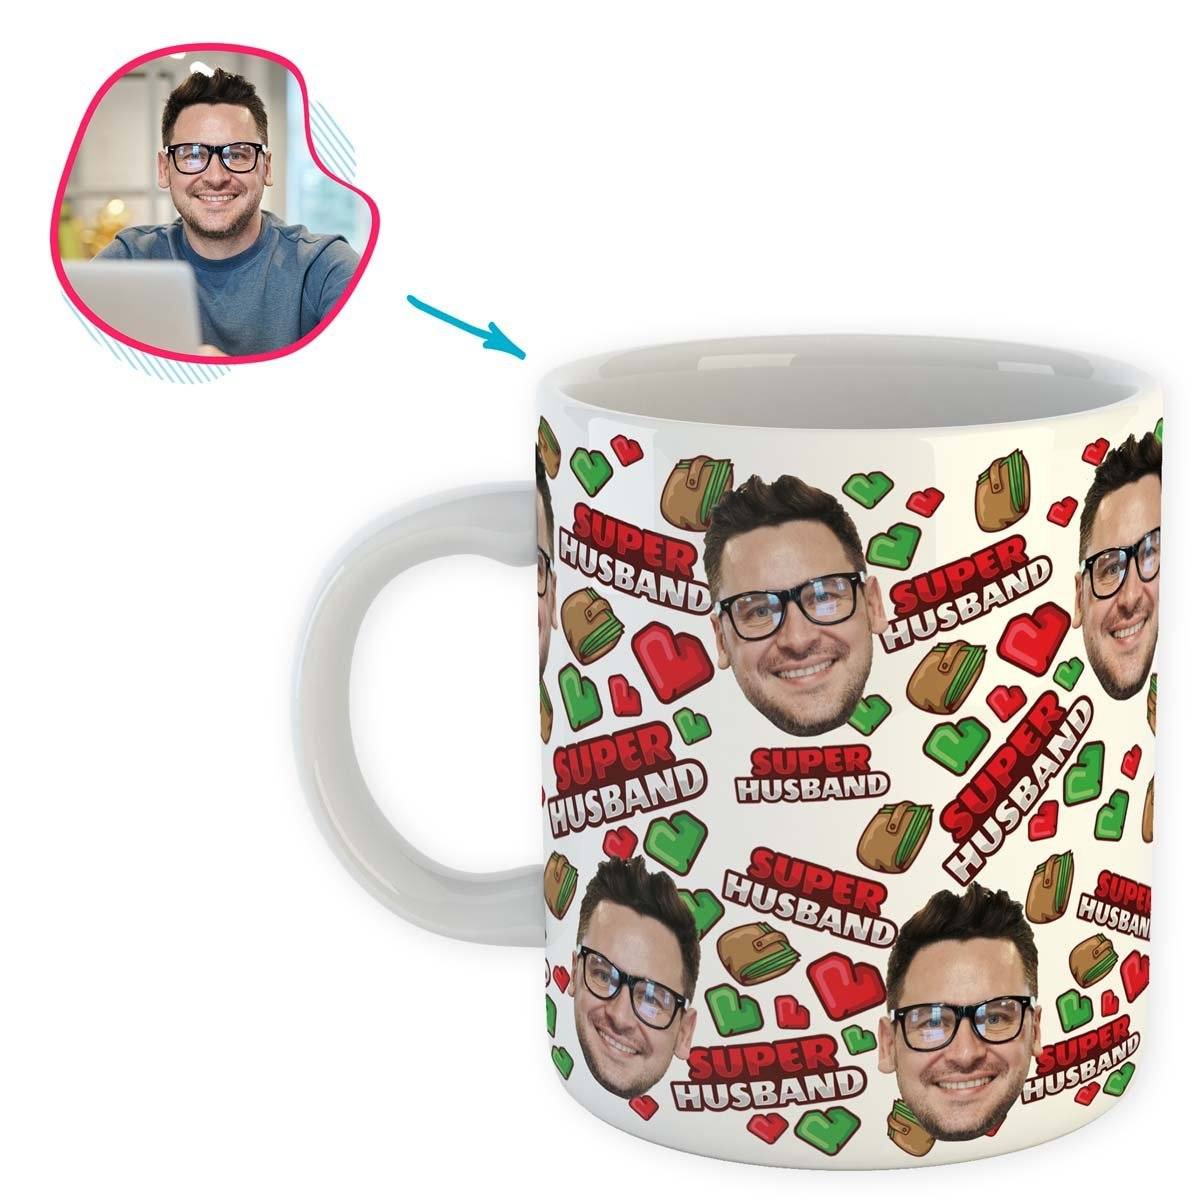 White Husband personalized mug with photo of face printed on it